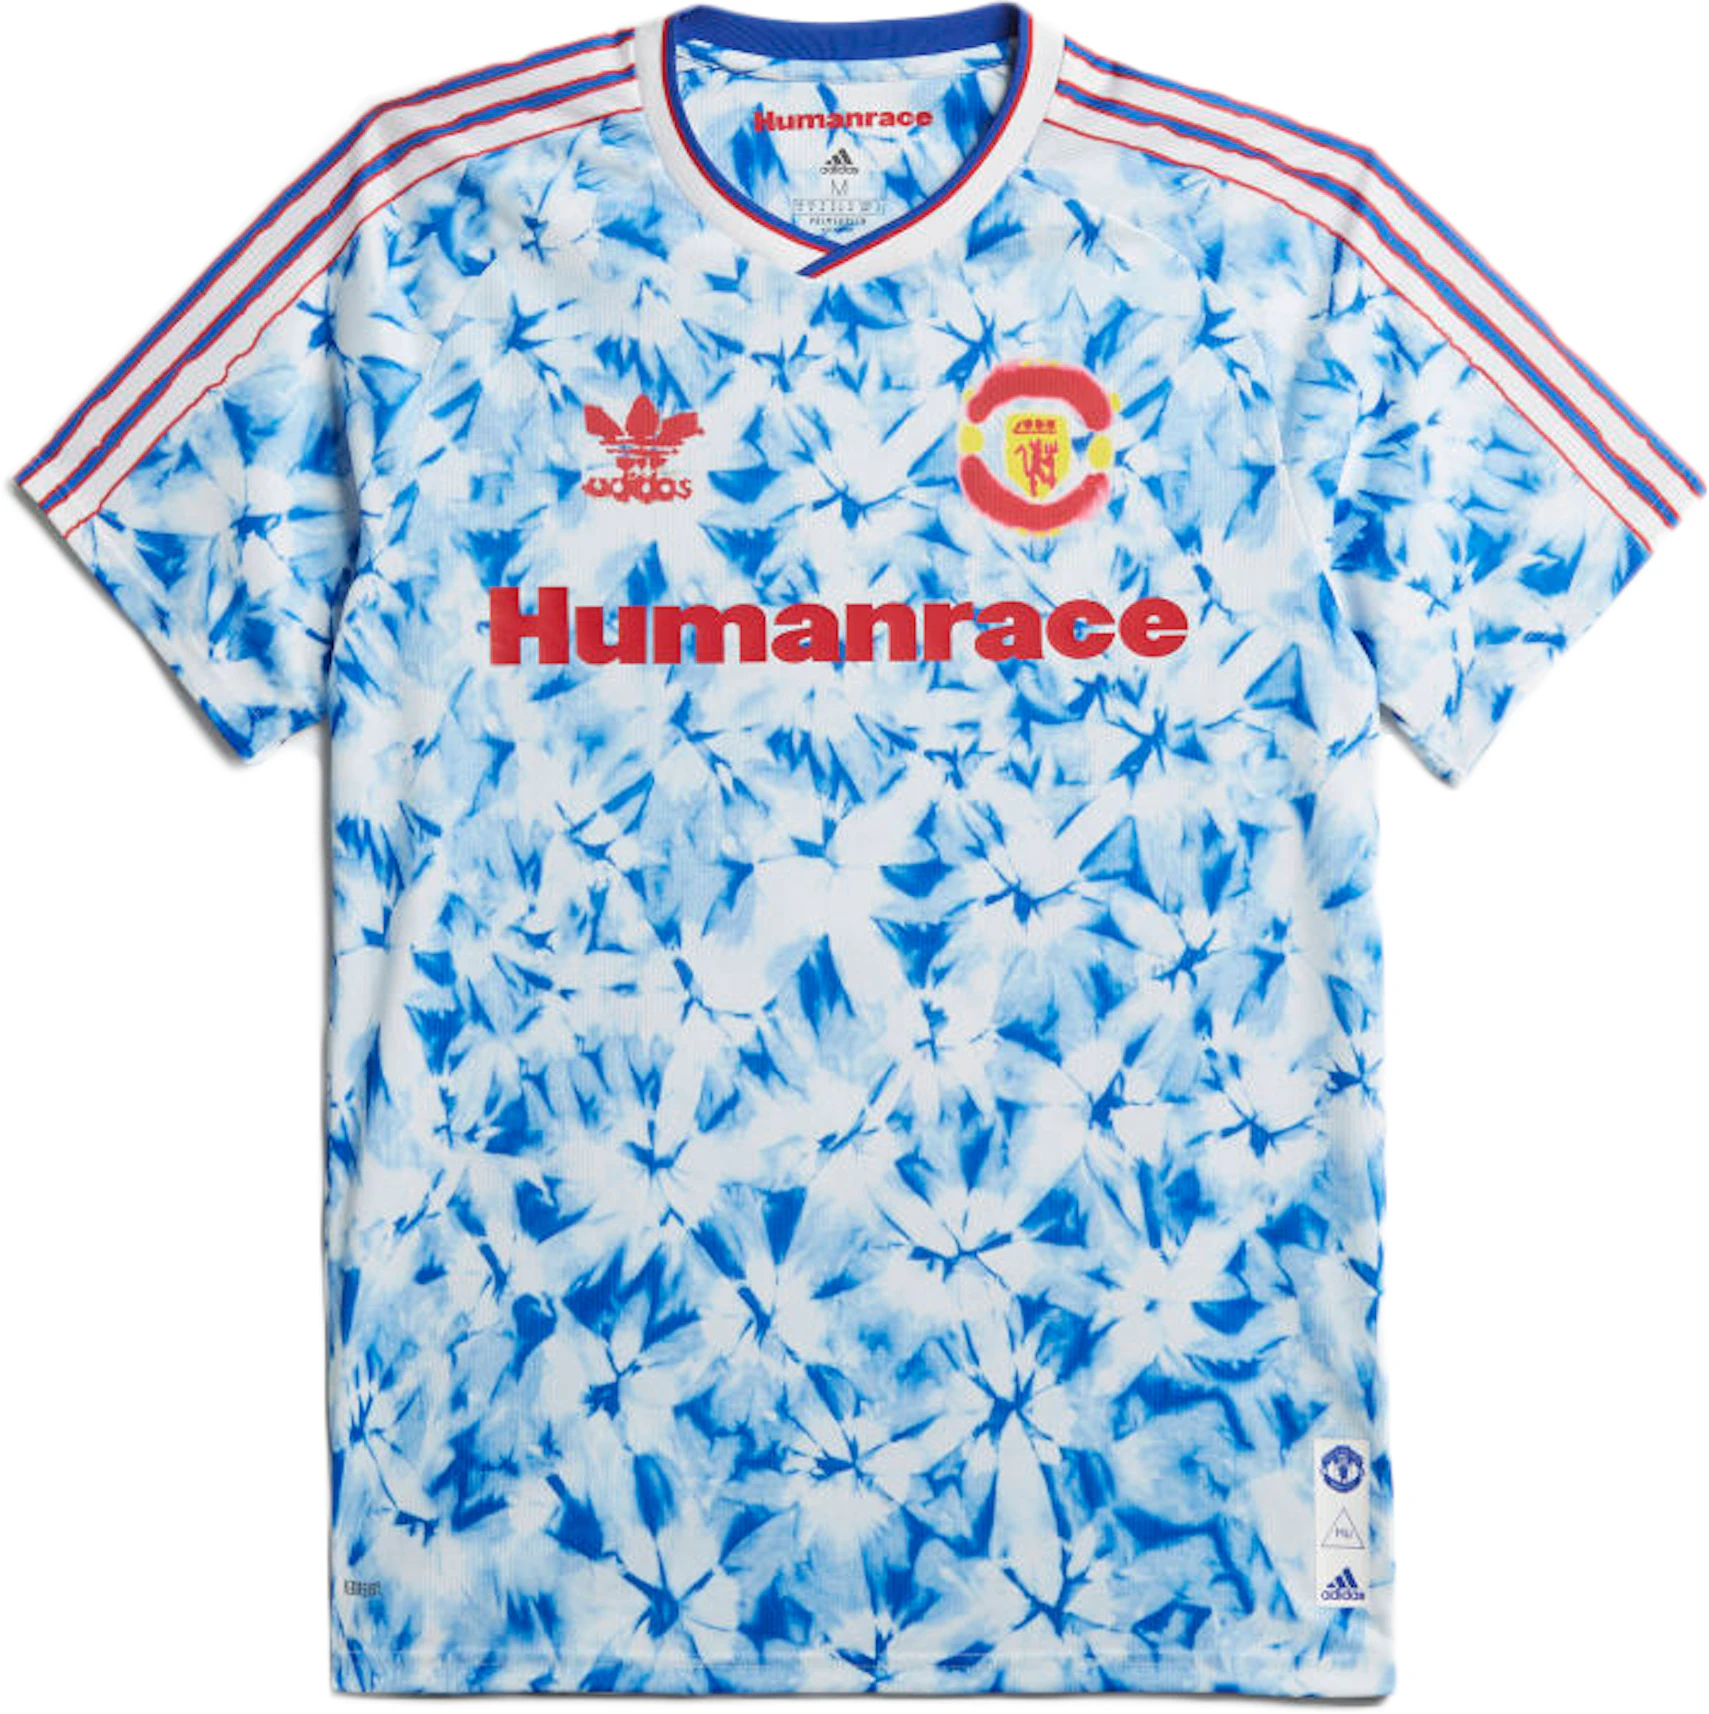 adidas Manchester United Human Race Jersey Blue FW20 - US